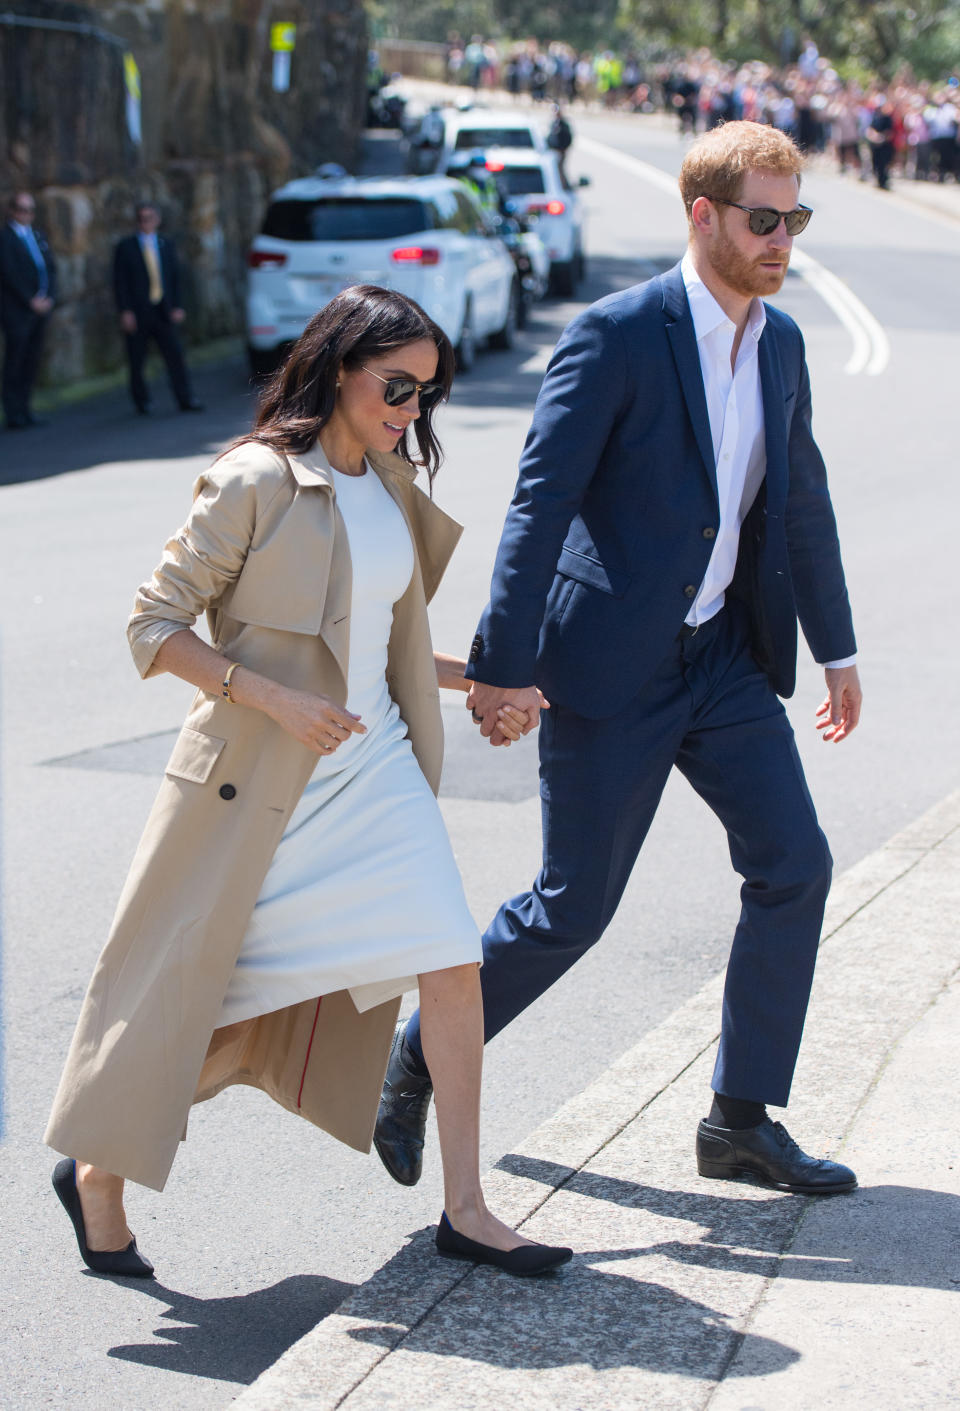 The Duchess of Sussex wearing Rothy's at Taronga Zoo on October 16, 2018. [Photo: Getty Images]